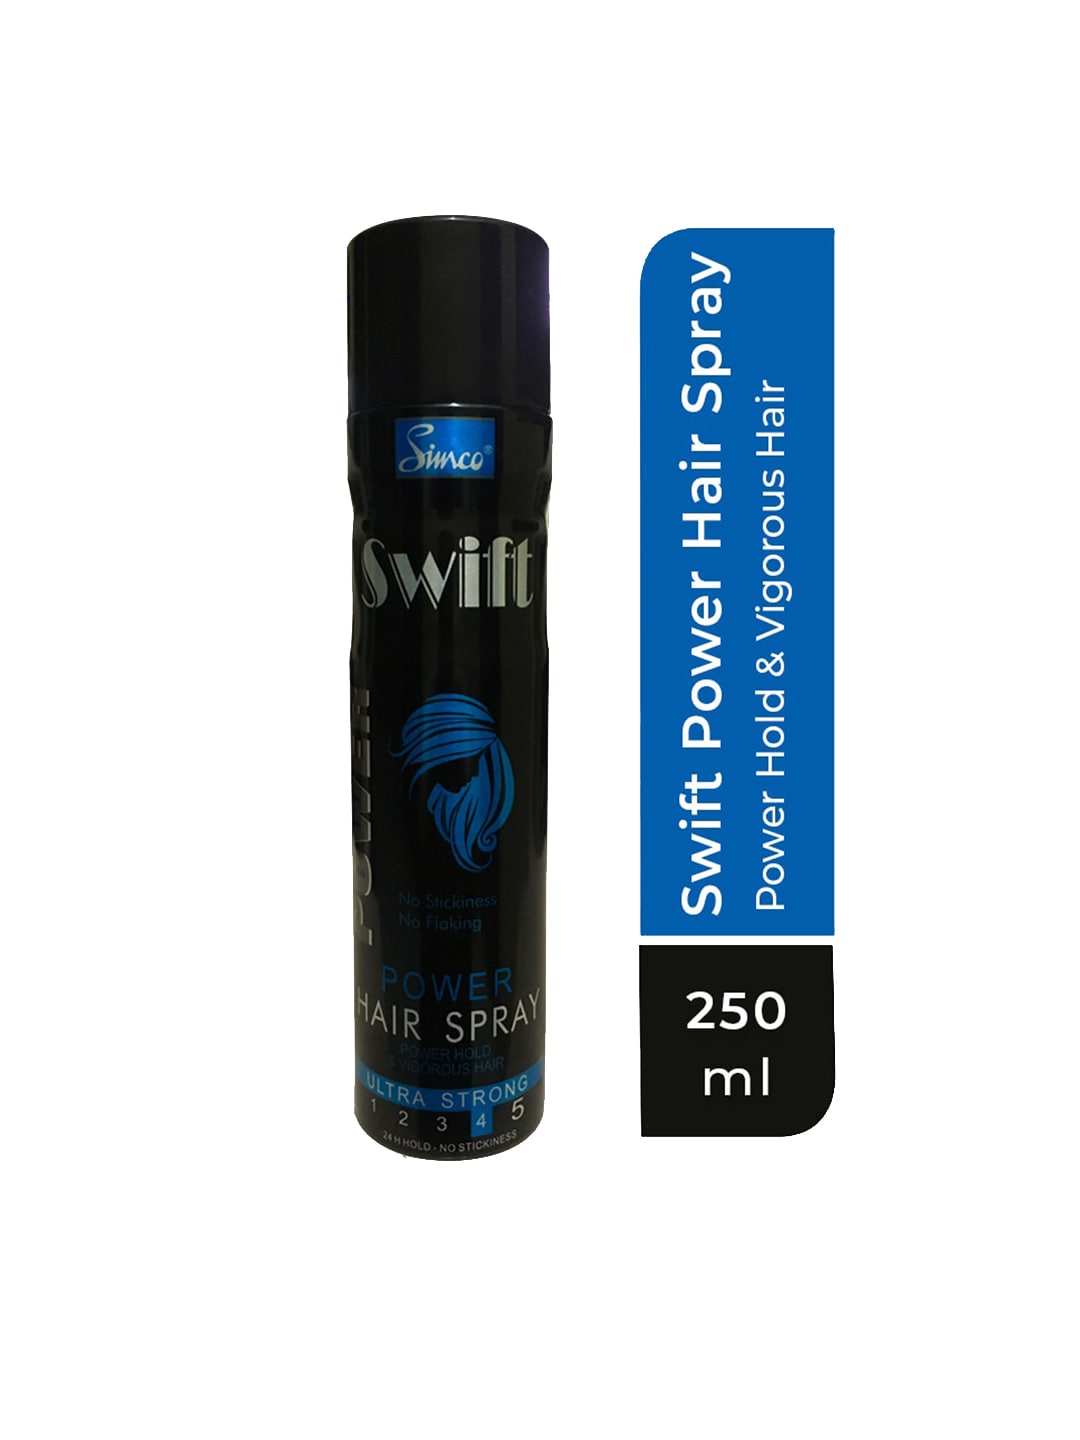 Simco Swift Ultra Strong Power Hair Spray 250 ml Price in India